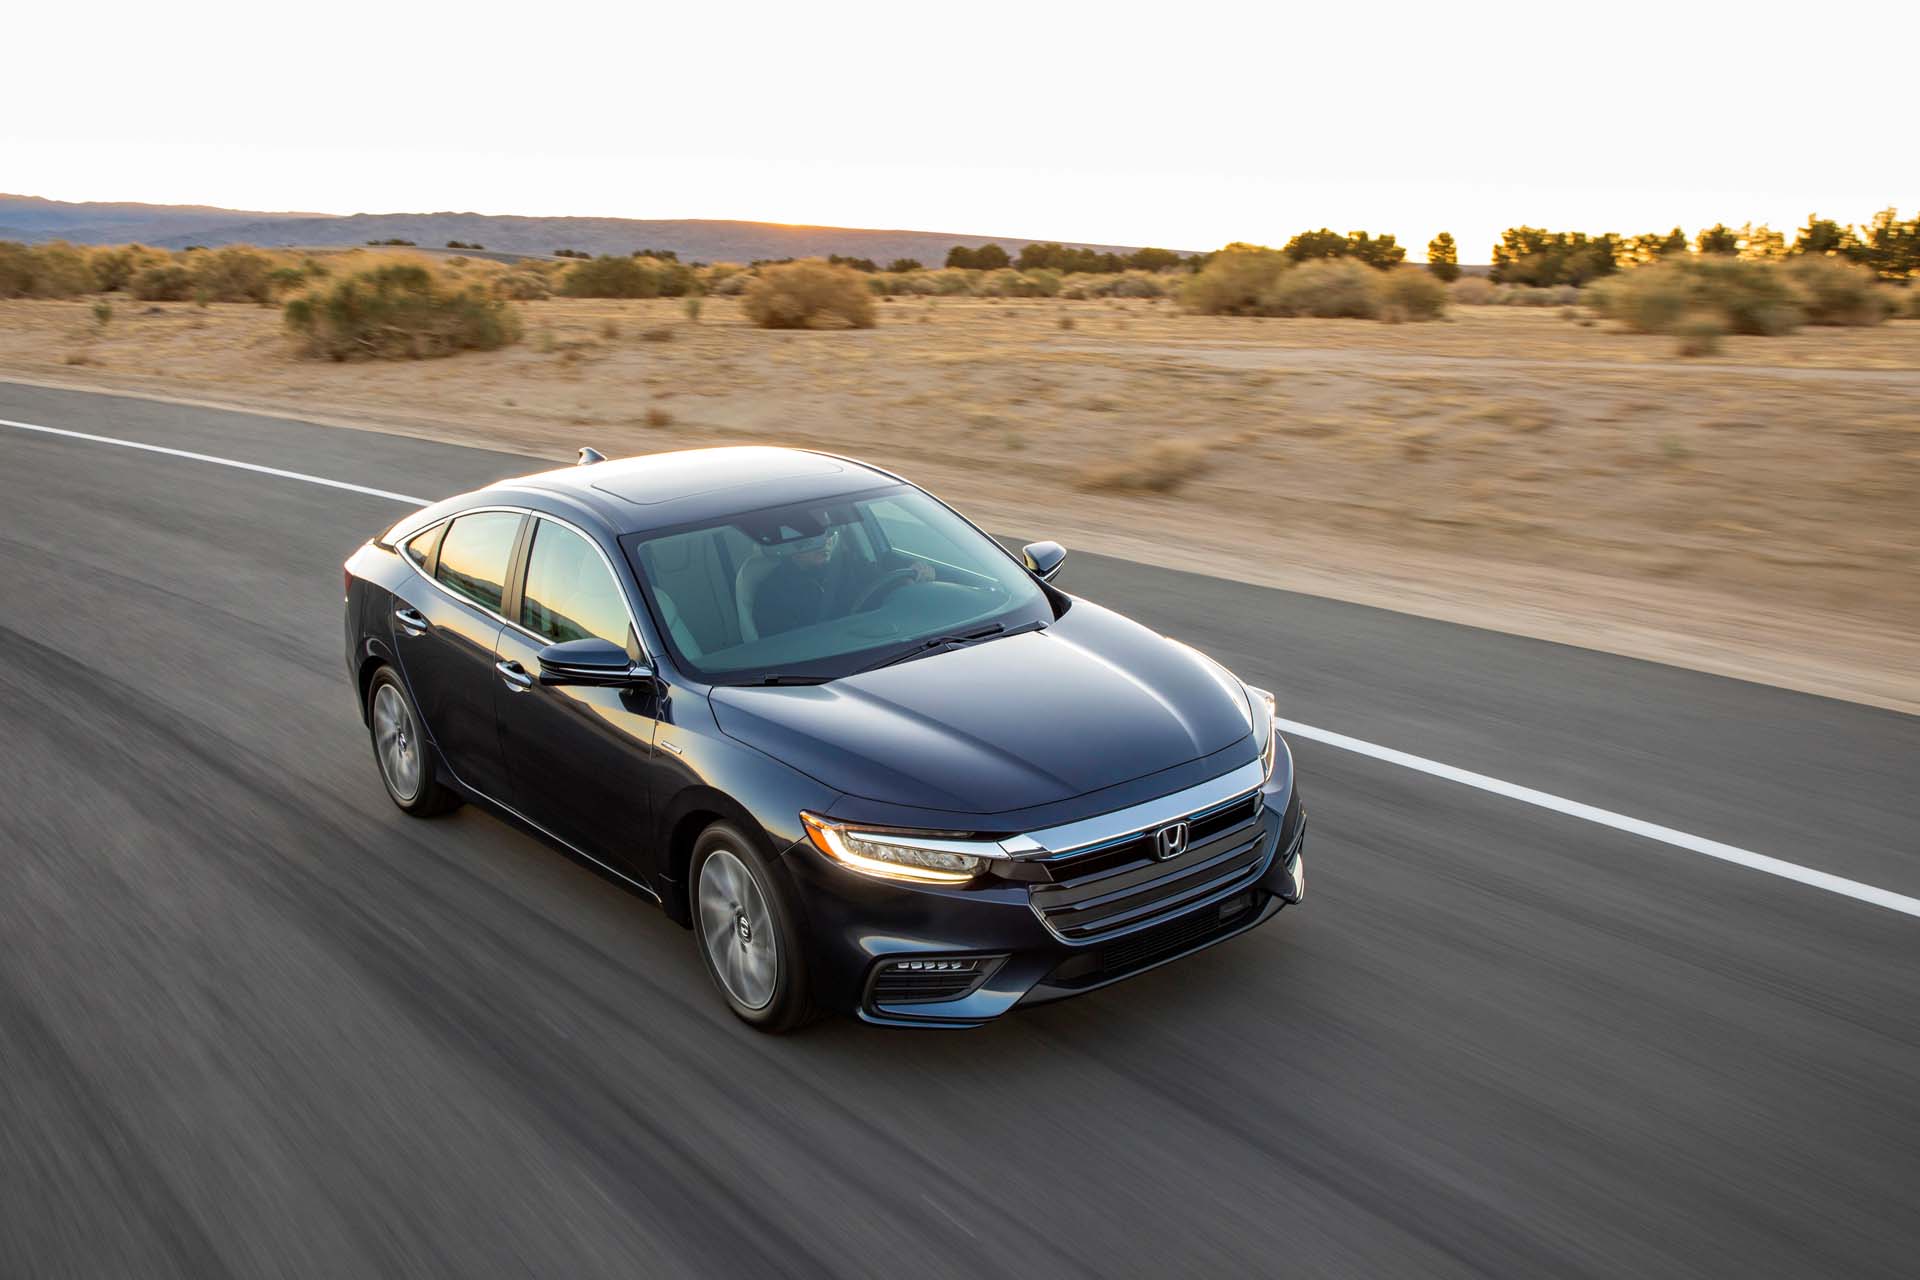 2020 Honda Insight Review, Ratings, Specs, Prices, and Photos - The Car